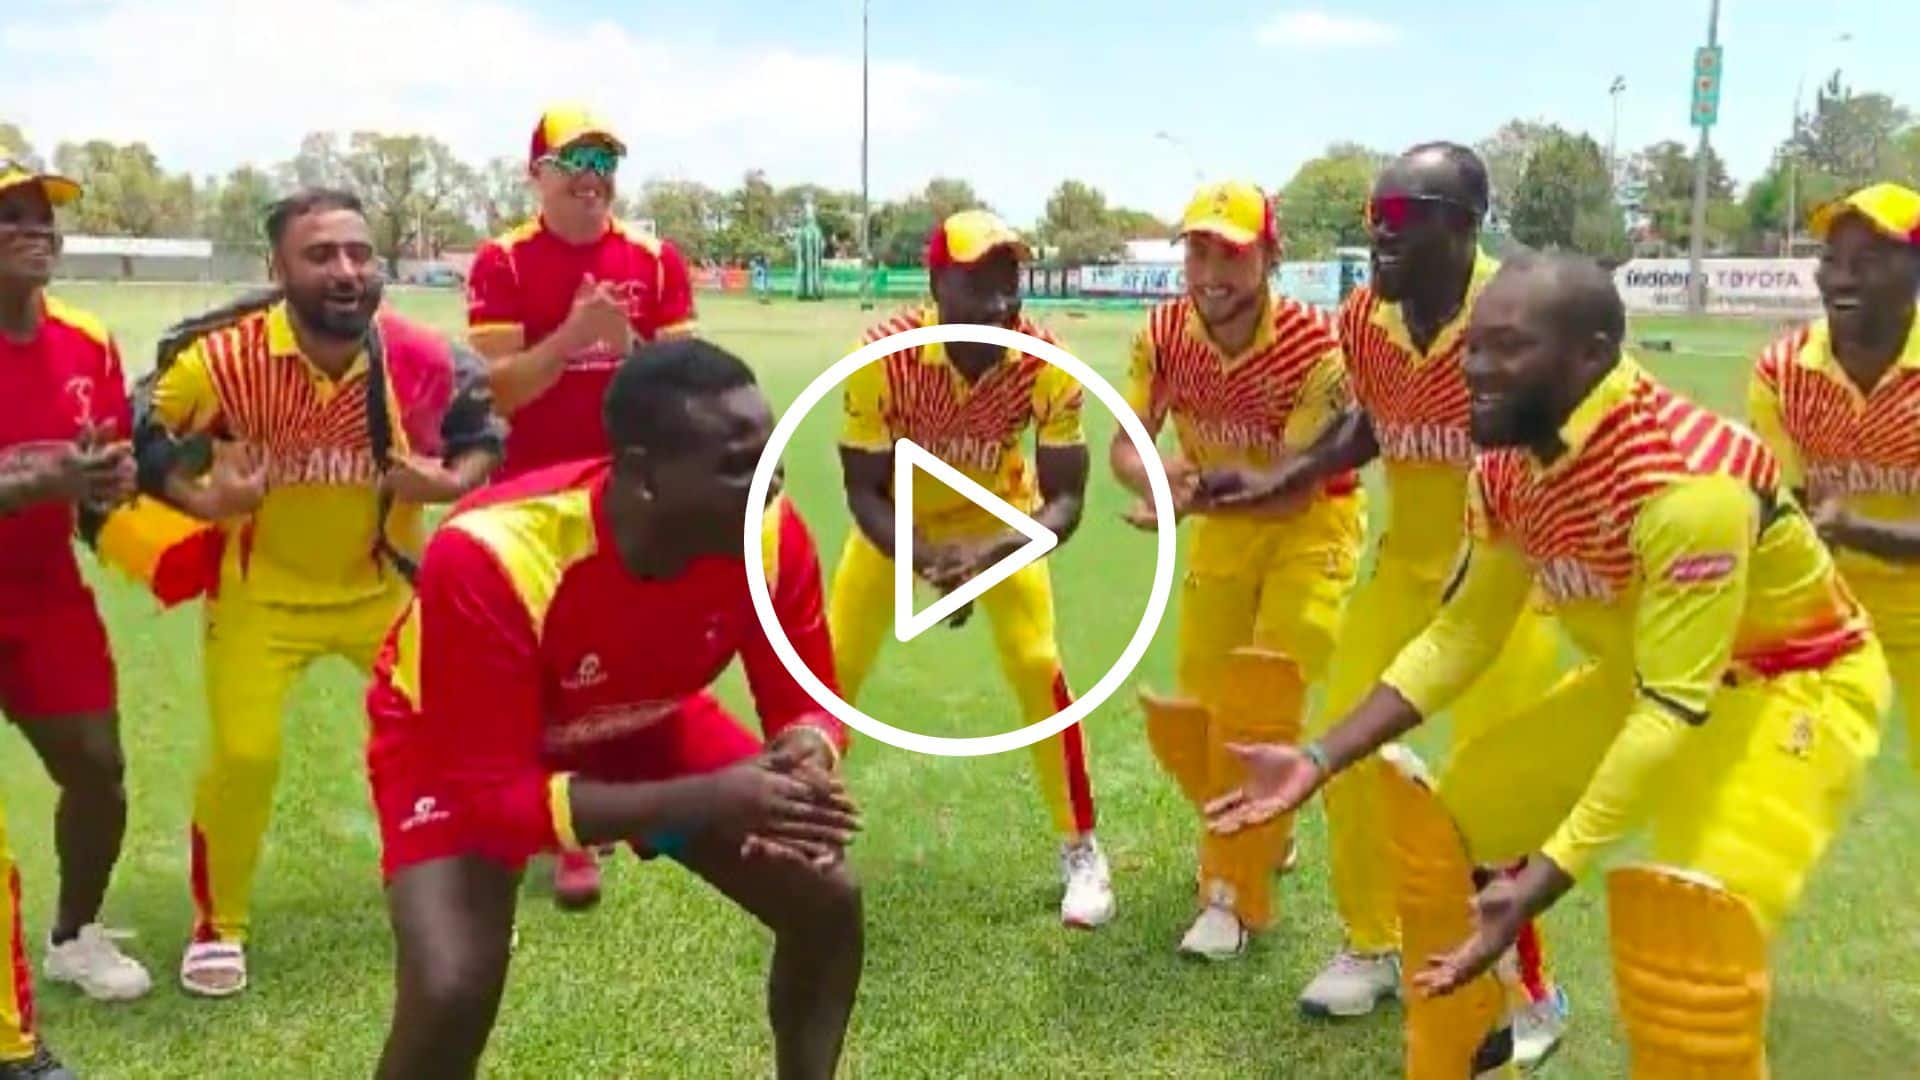 [Watch] Uganda's Wild Dance Celebration Goes Viral After Historic T20 World Cup Qualification